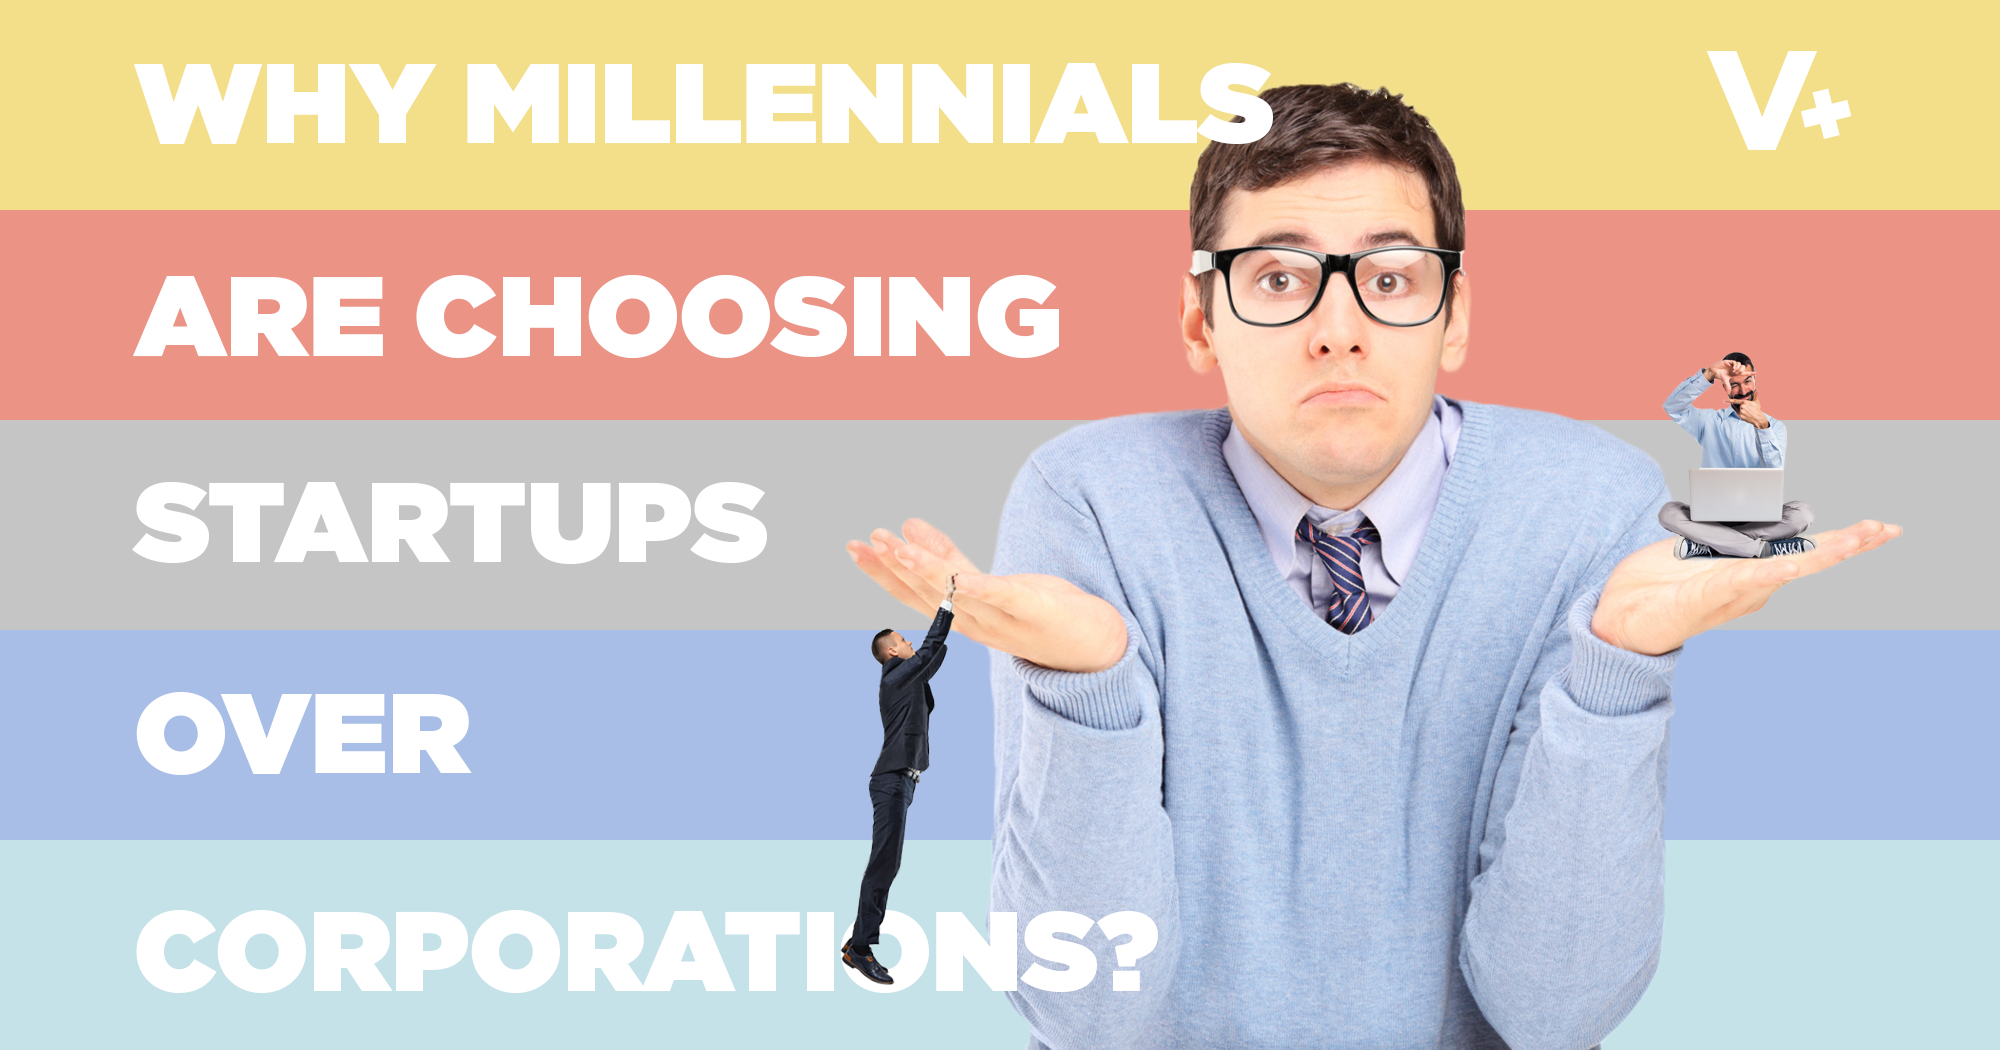 Why Millennials Are Choosing Startups vs Corporations